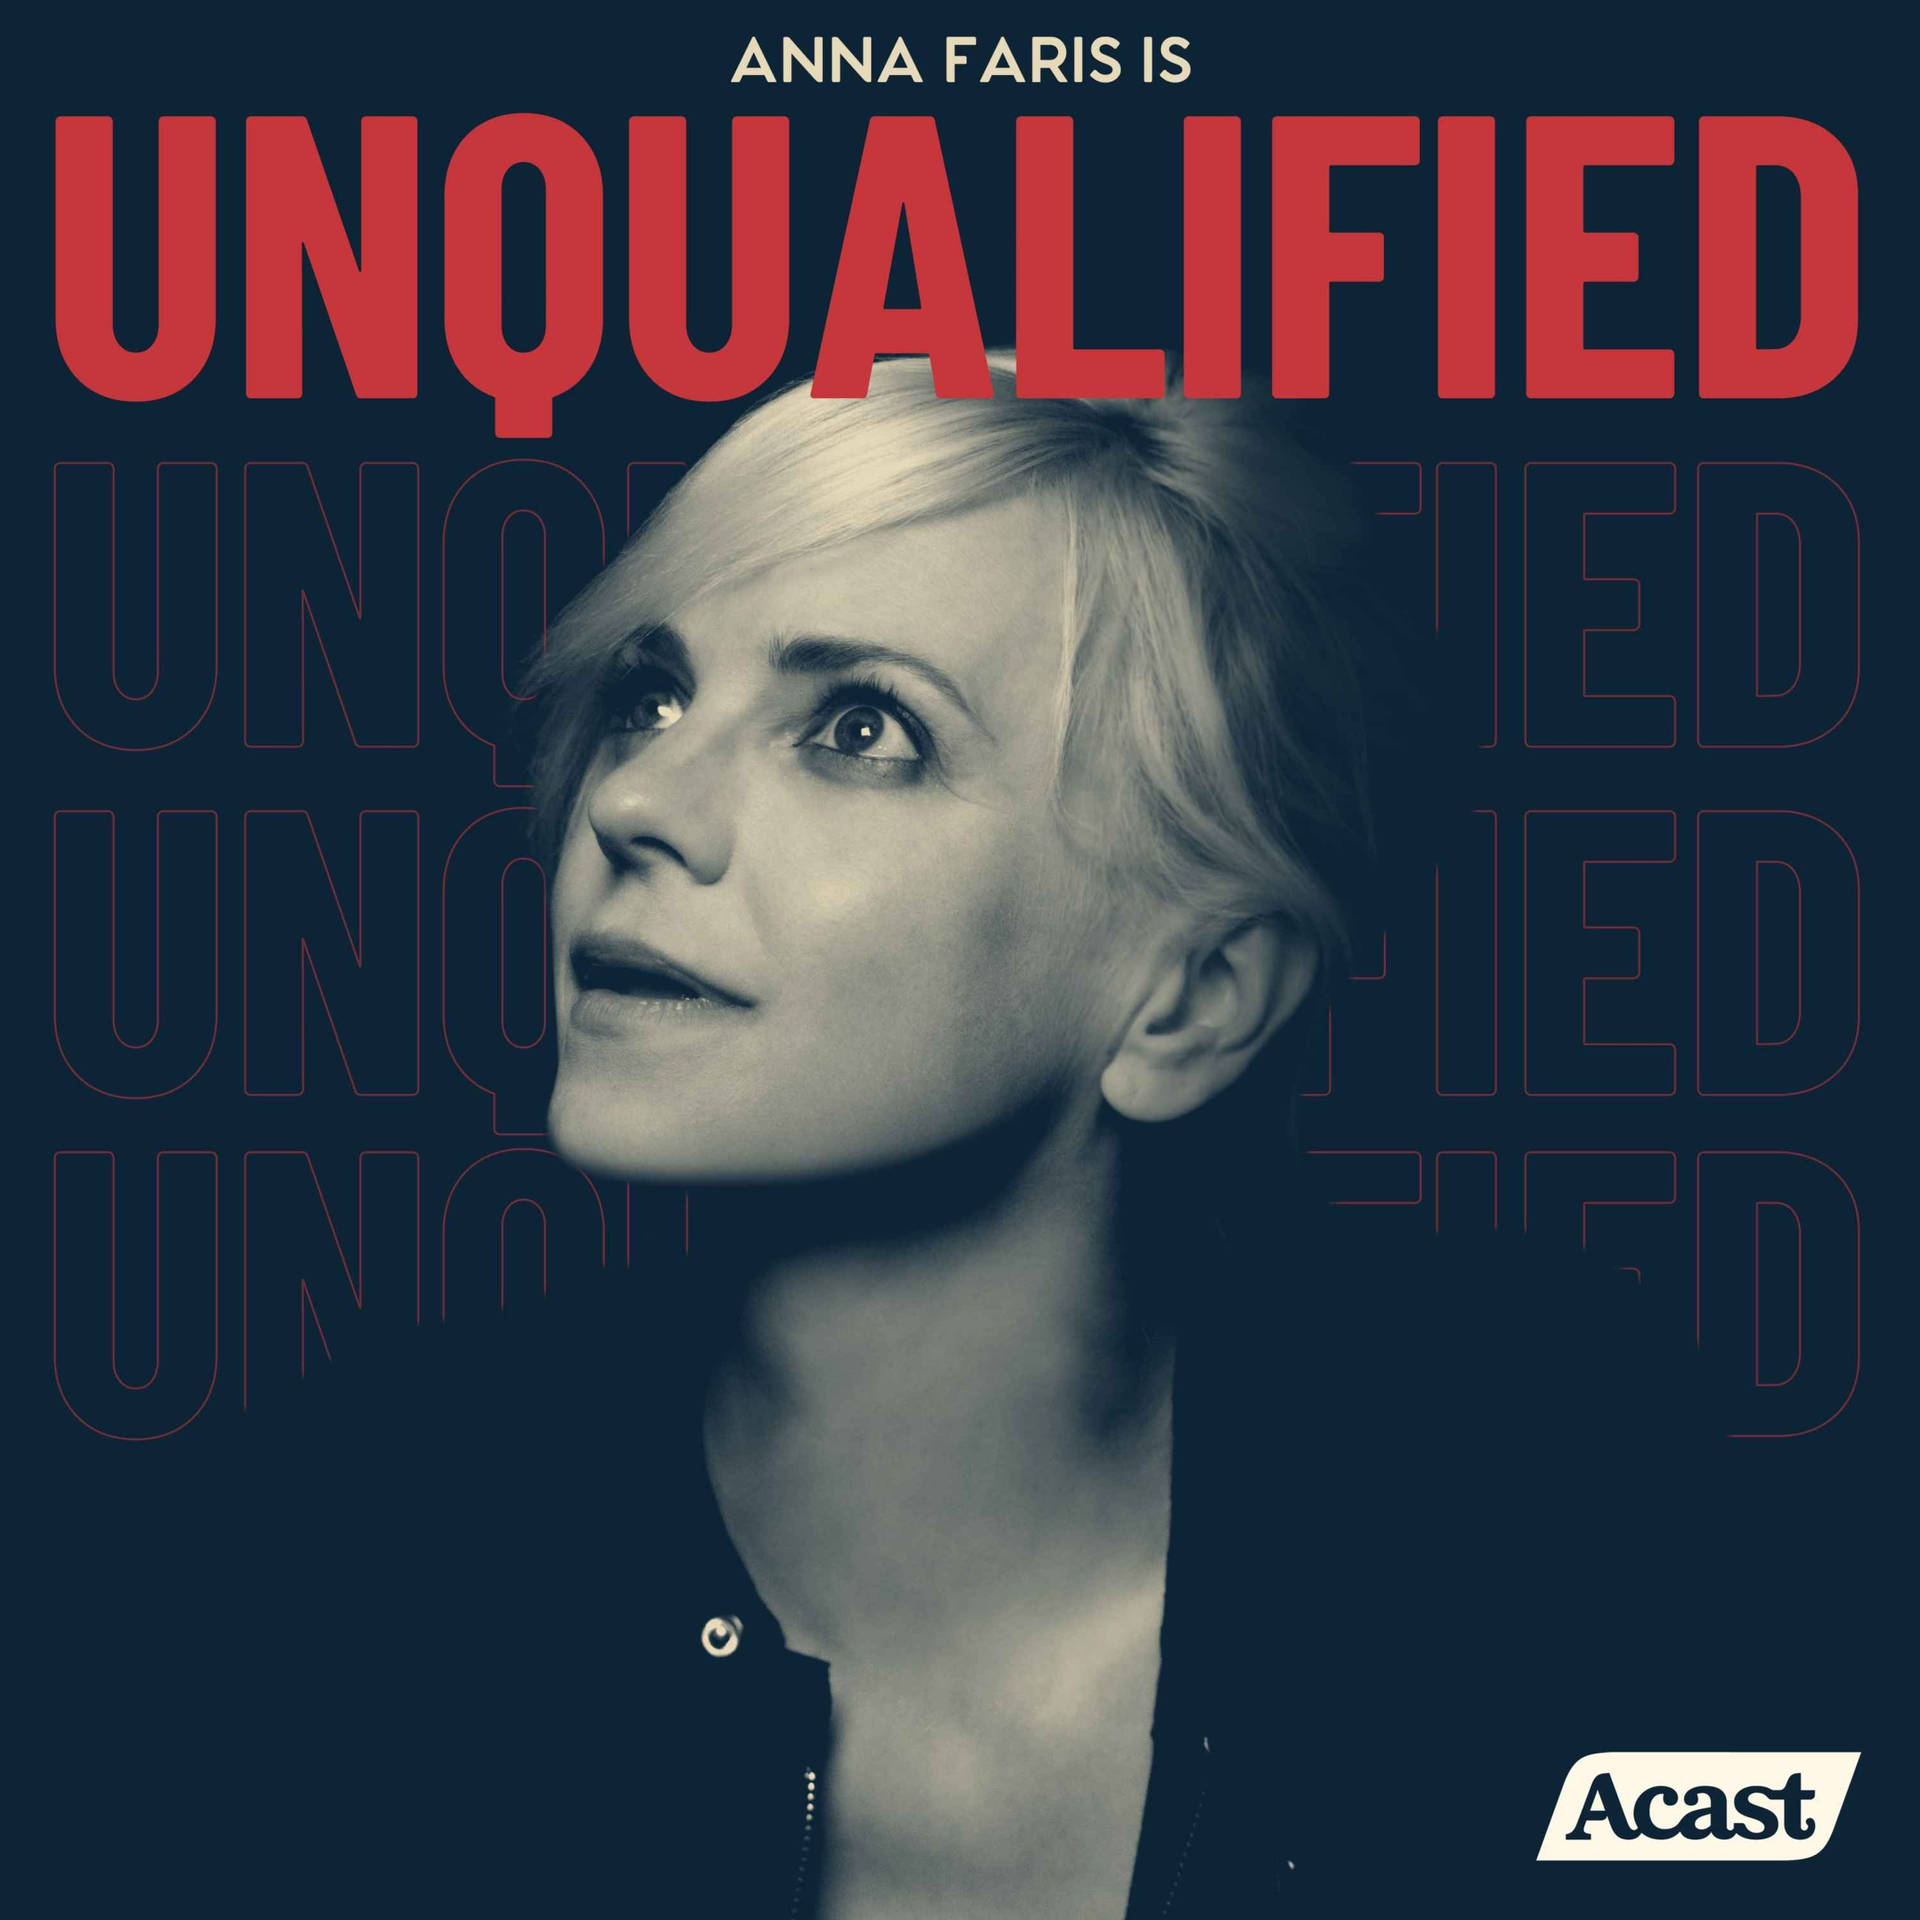 Anna Faris Is Unqualified Podcast Cover Background